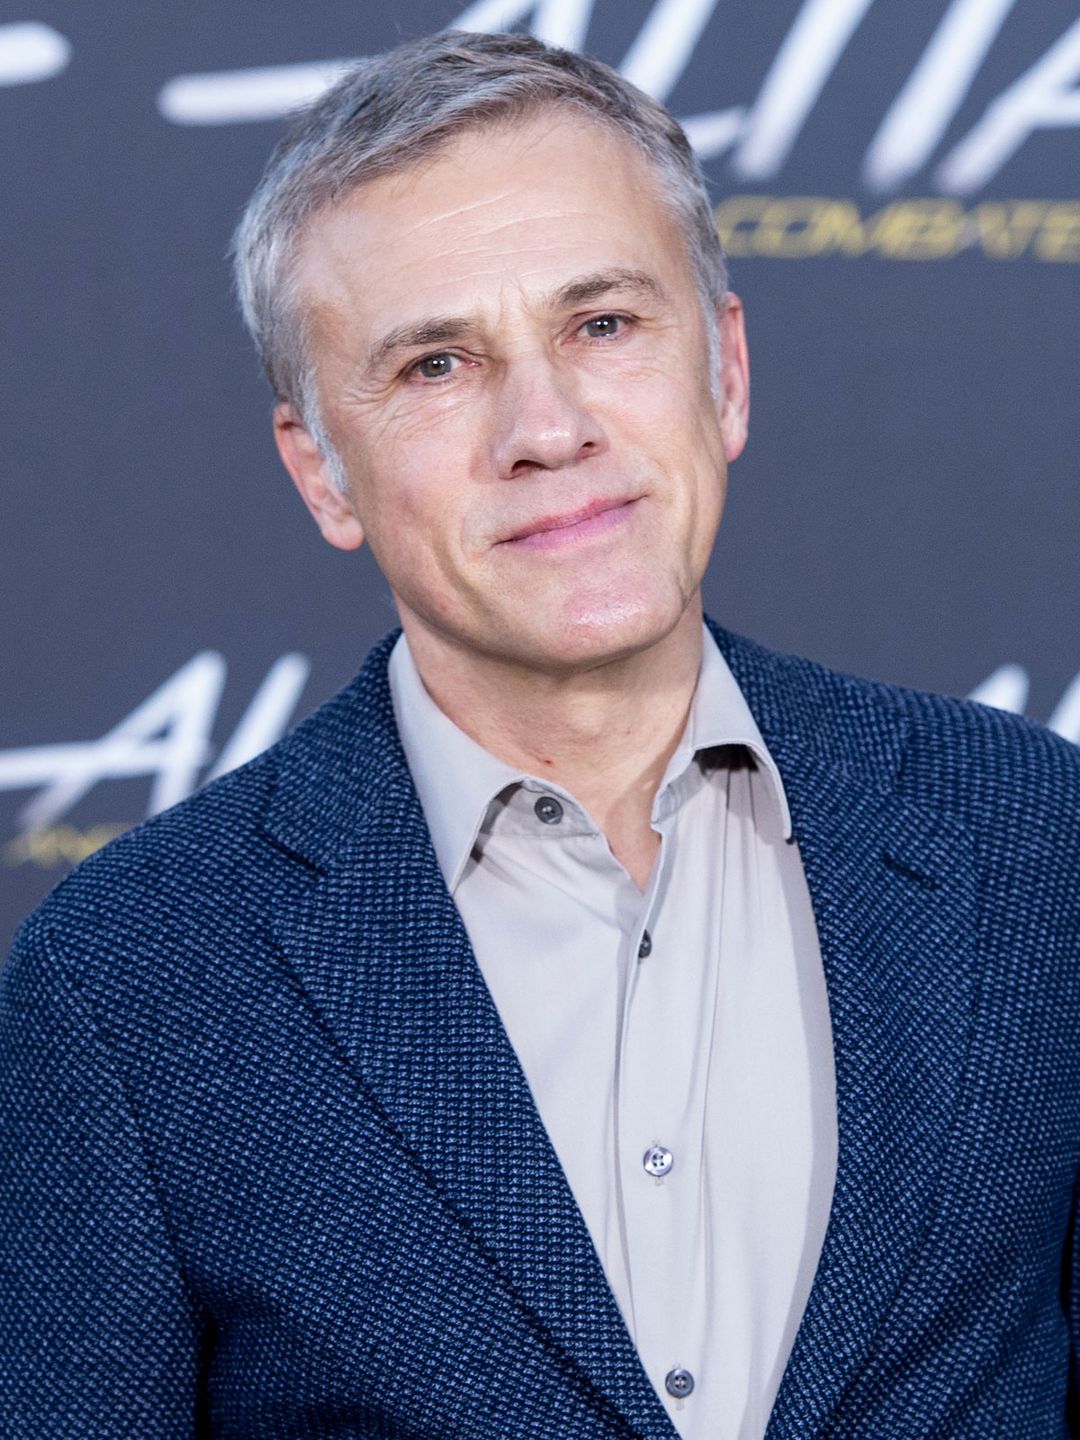 Christoph Waltz who is his father